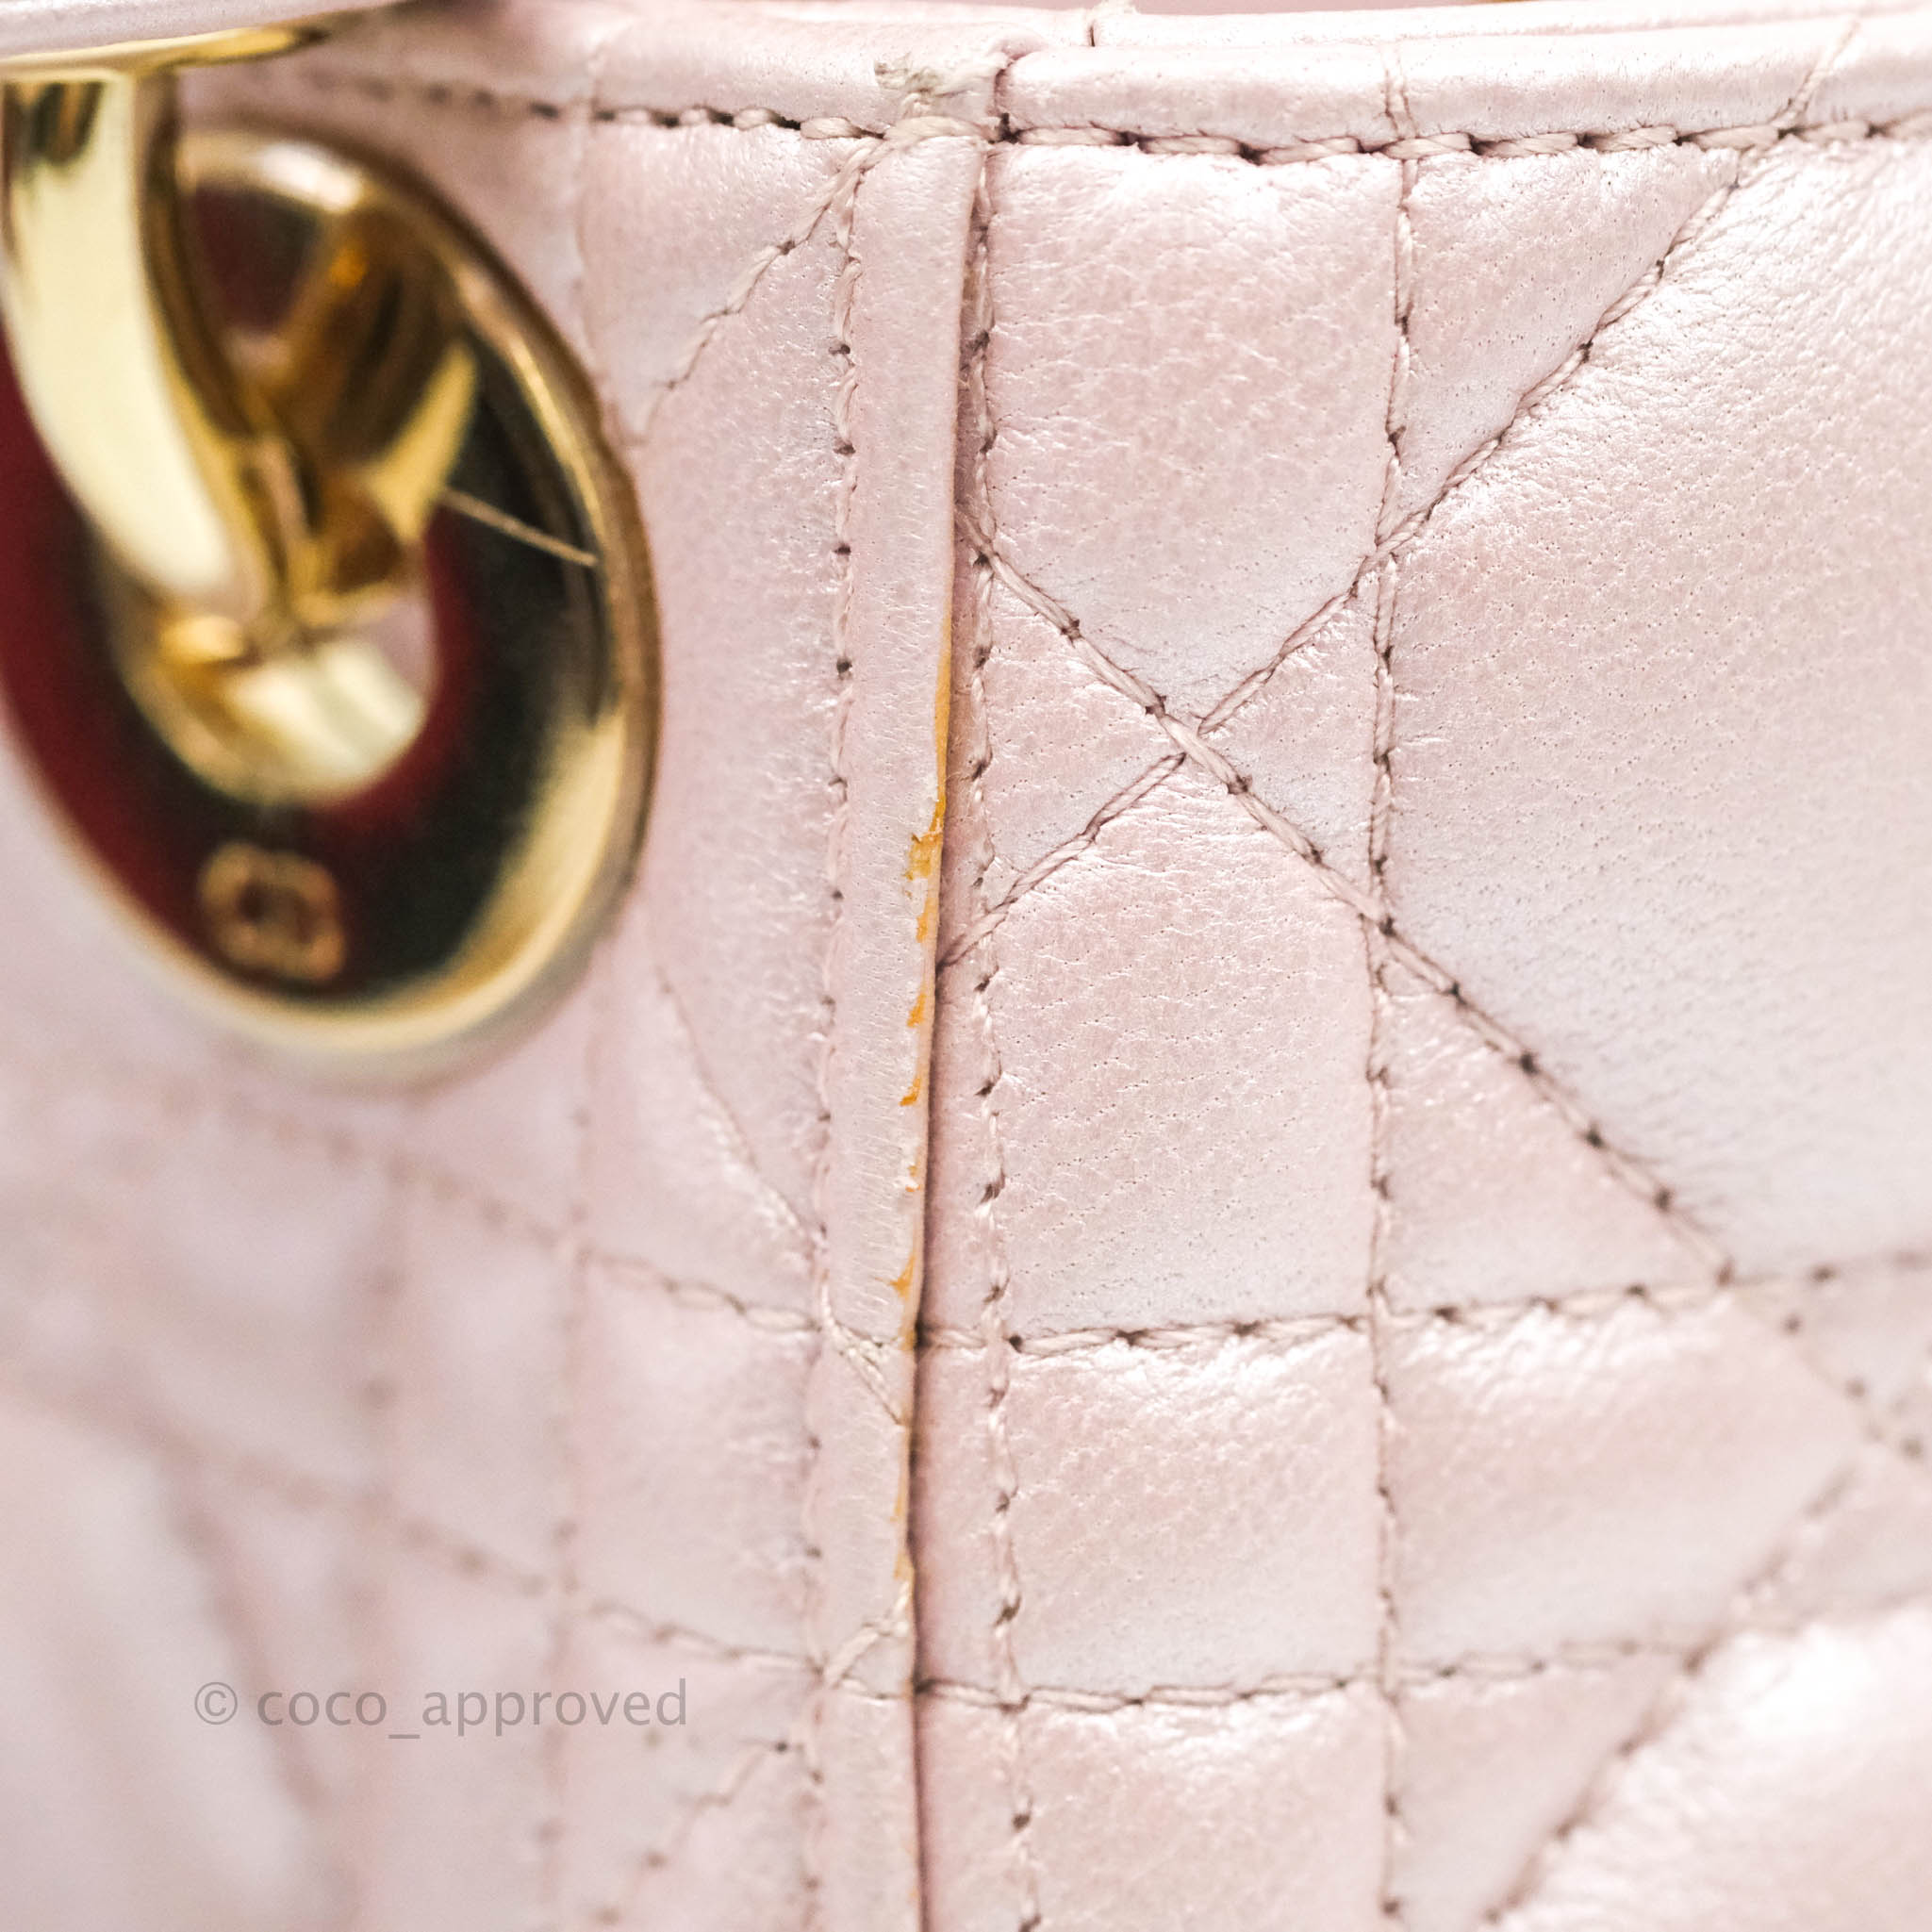 2015 Christian Dior Pink Quilted Metallic Calfskin Leather Mini